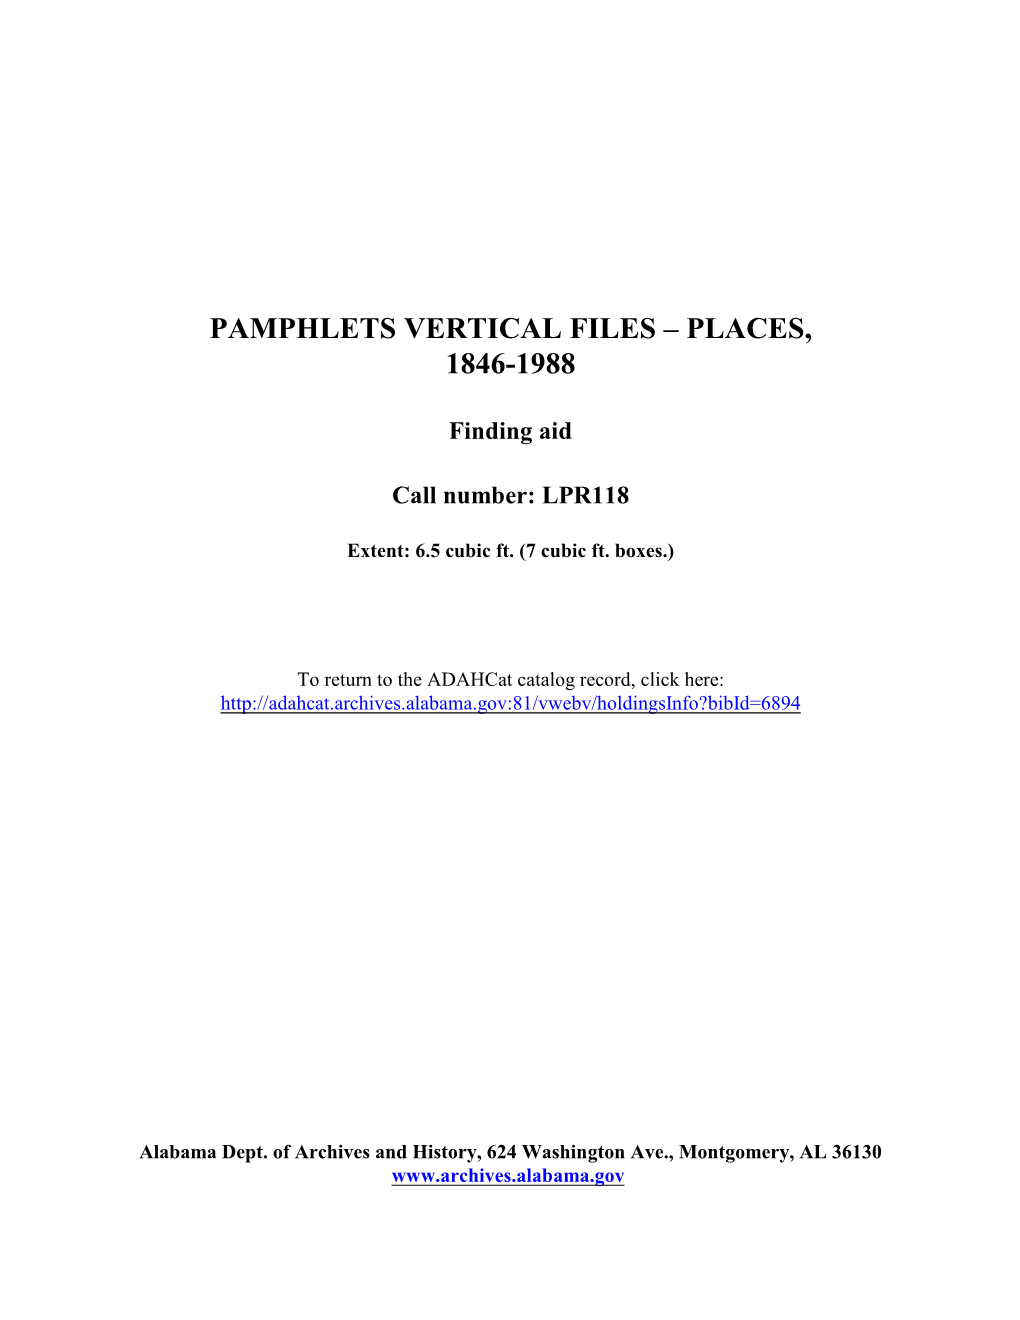 Pamphlets Vertical Files -- Places Finding